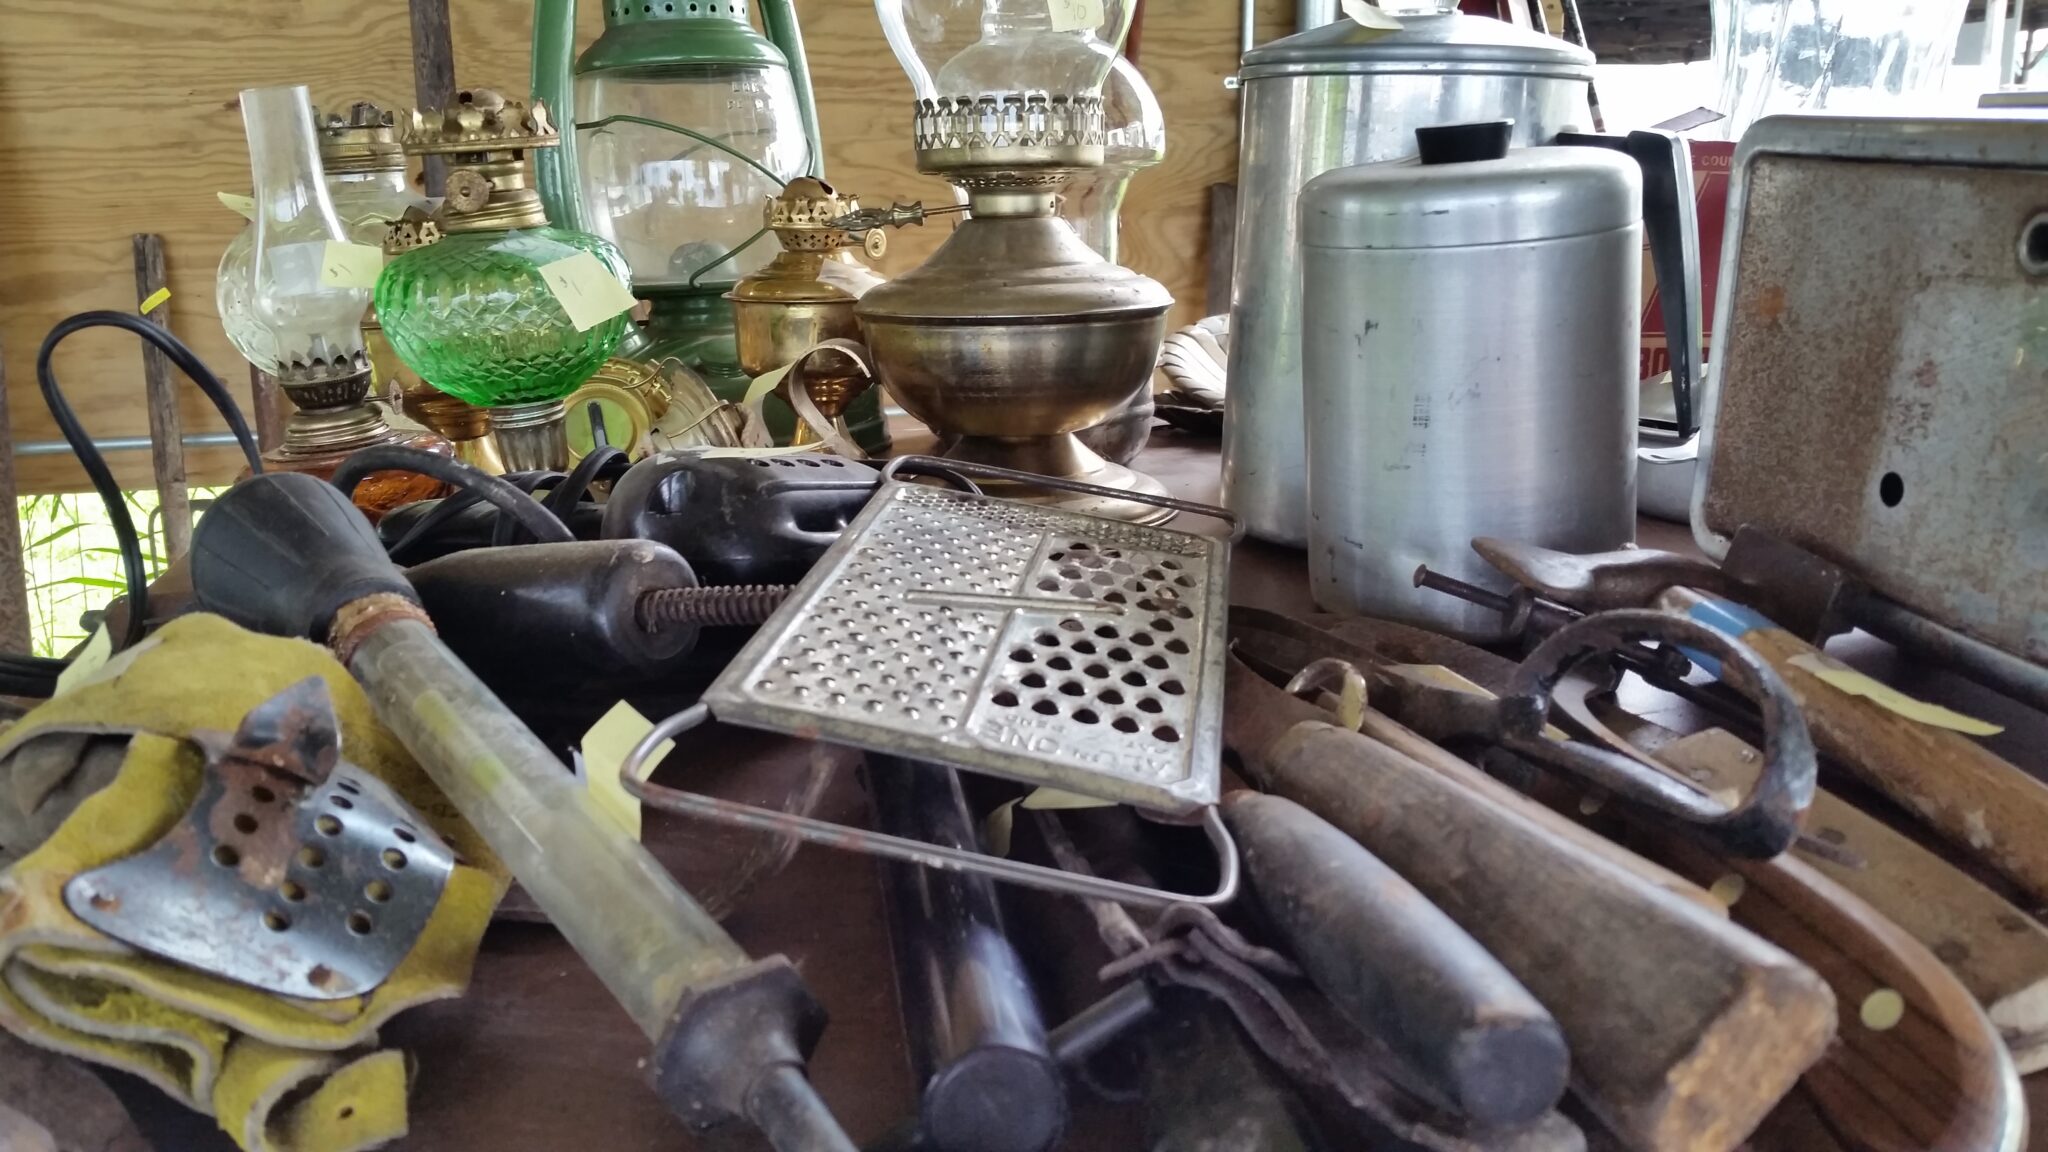 Rusty Tools and Oil Lamps at the Flea Market